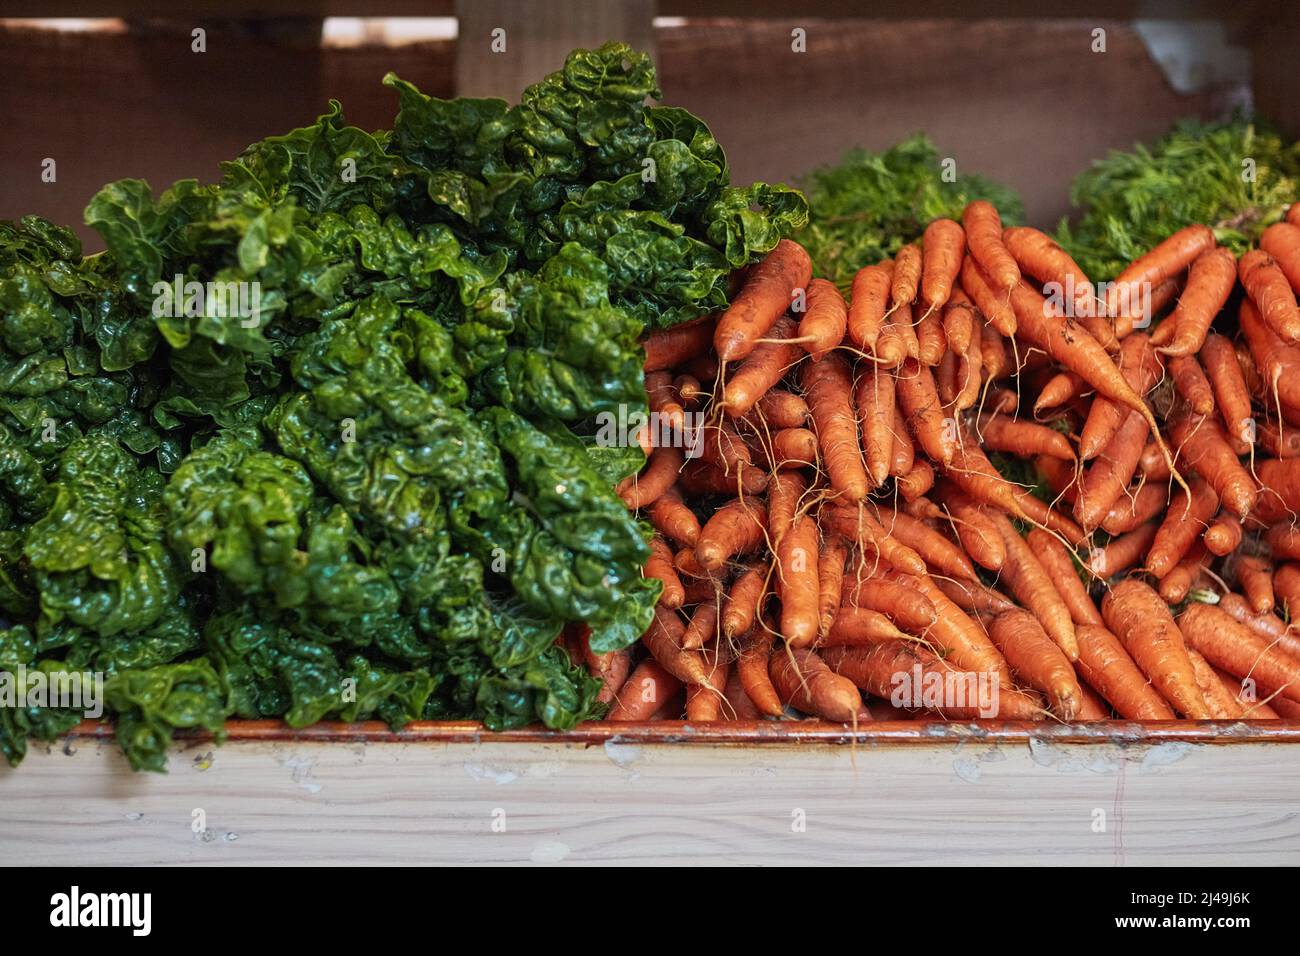 Nature has a selection of goodness to enjoy. Shot of fresh produce in a grocery store. Stock Photo